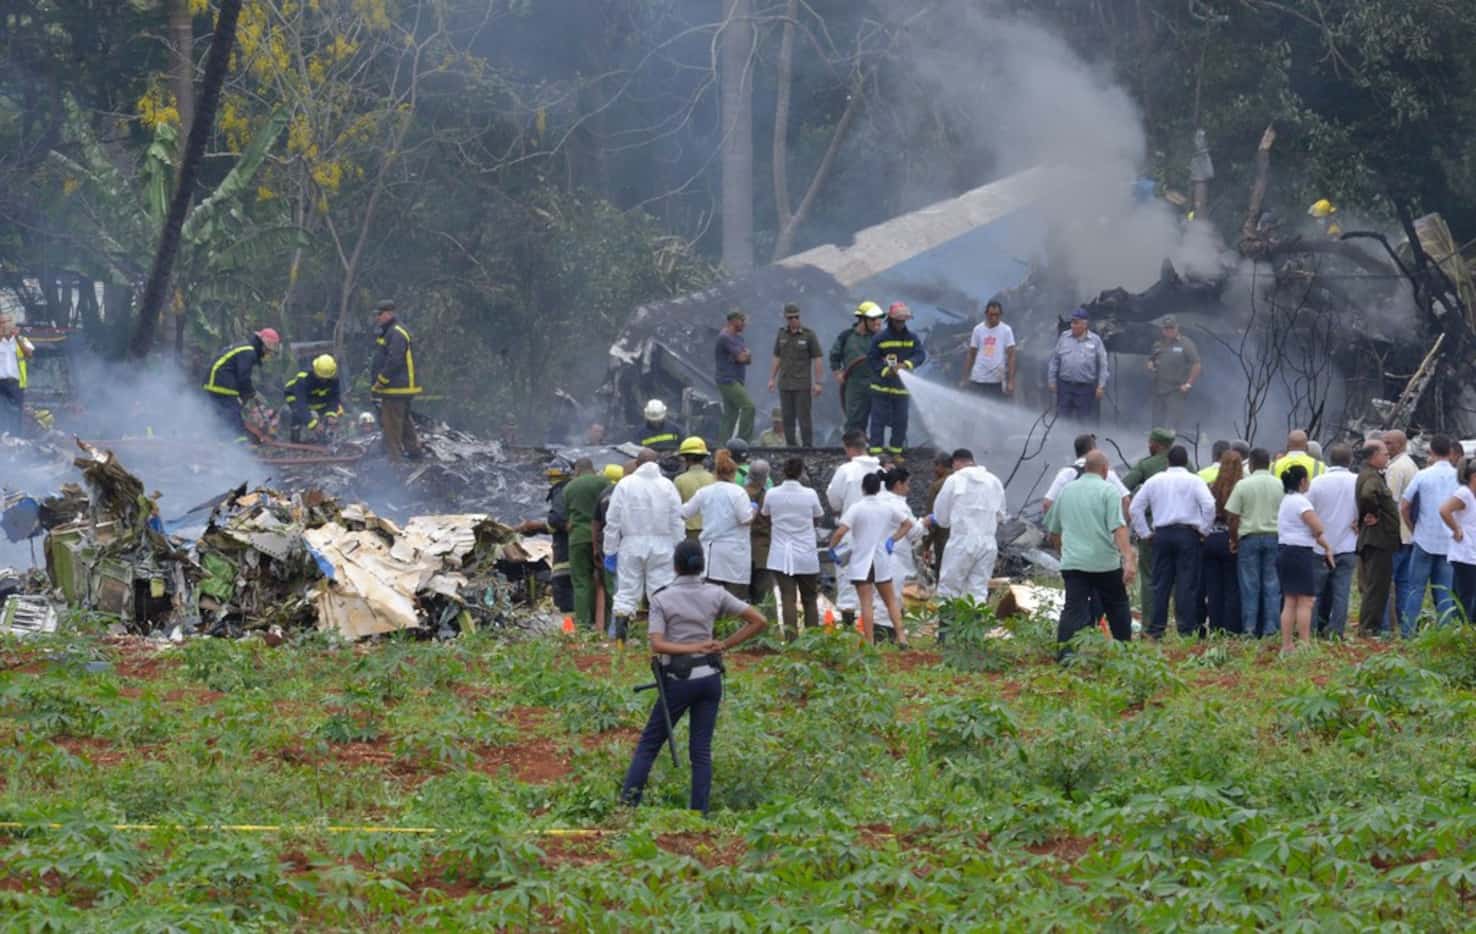 Picture taken at the scene after a Cubana de Aviacion aircraft crashed after taking off from...